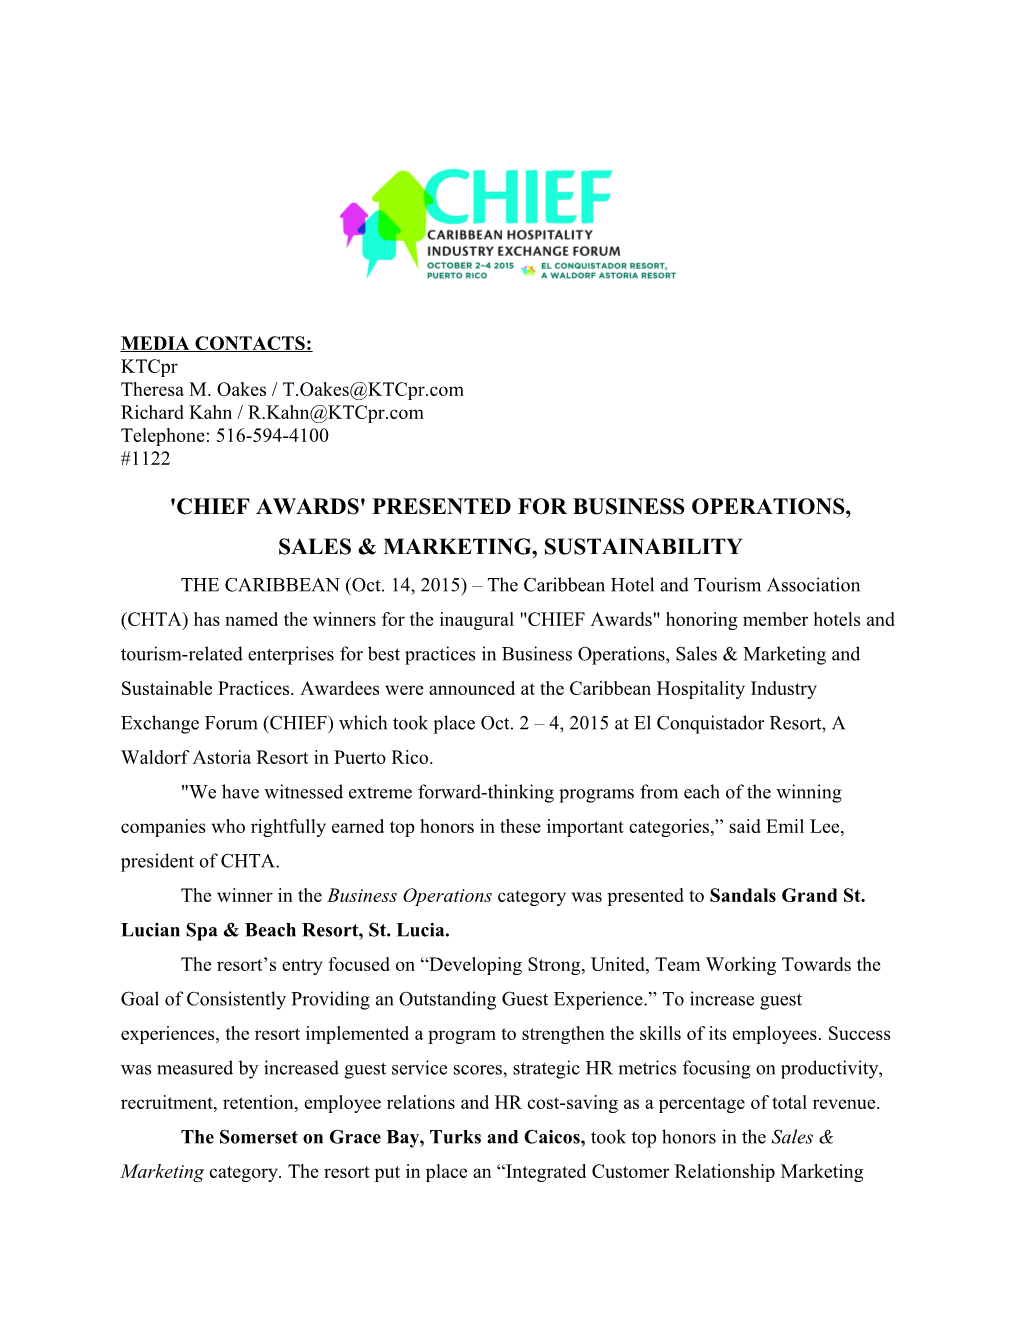 'Chief Awards' Presented for Business Operations